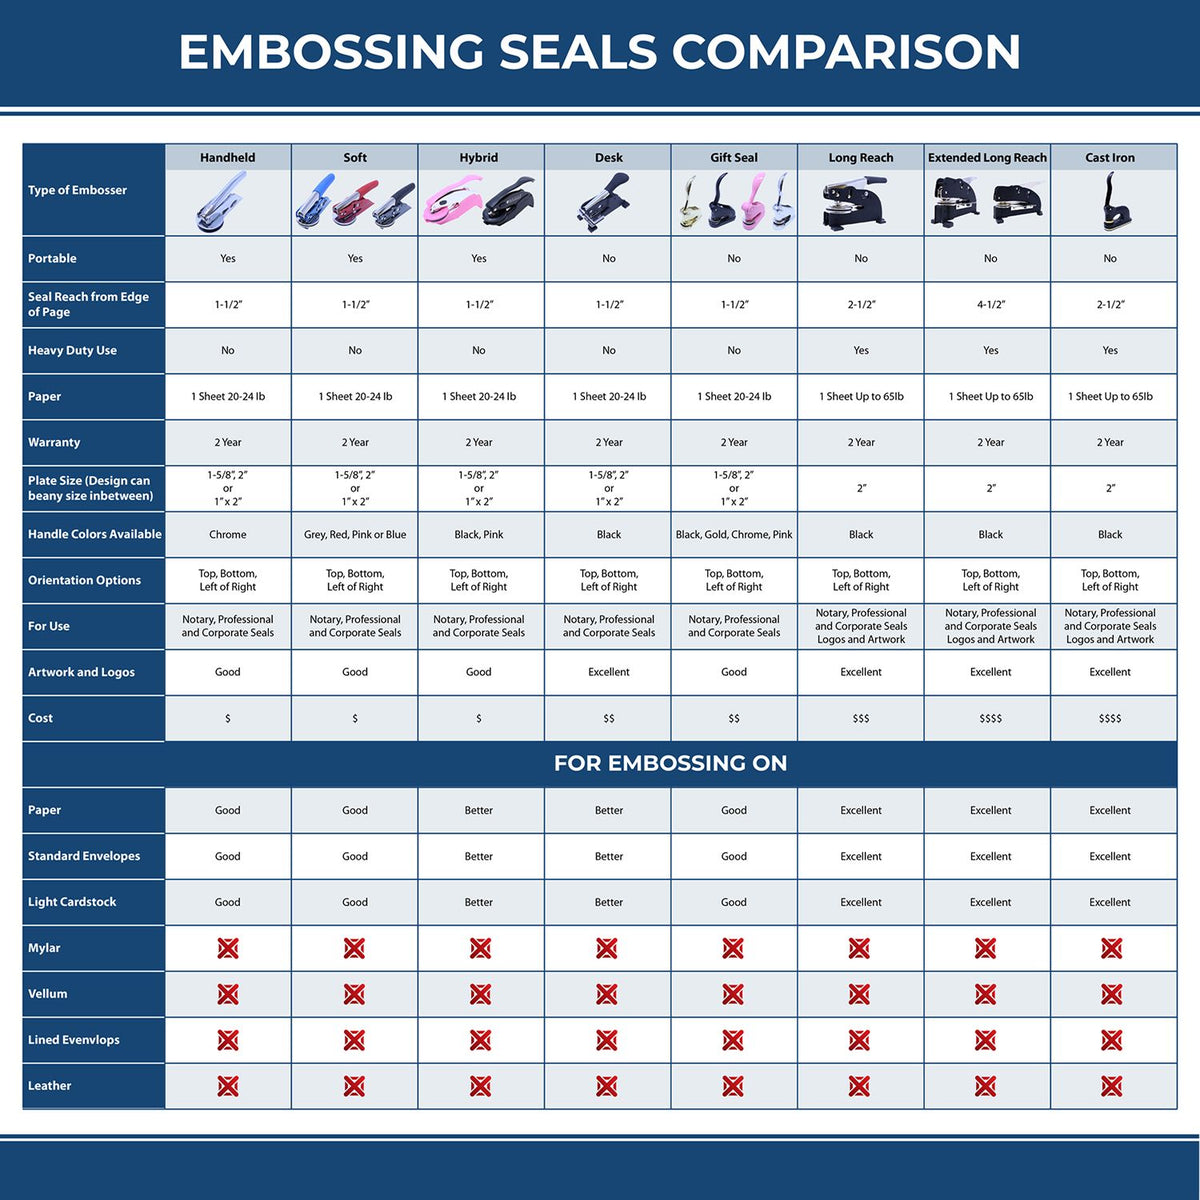 A comparison chart for the different types of mount models available for the Kentucky Desk Surveyor Seal Embosser.